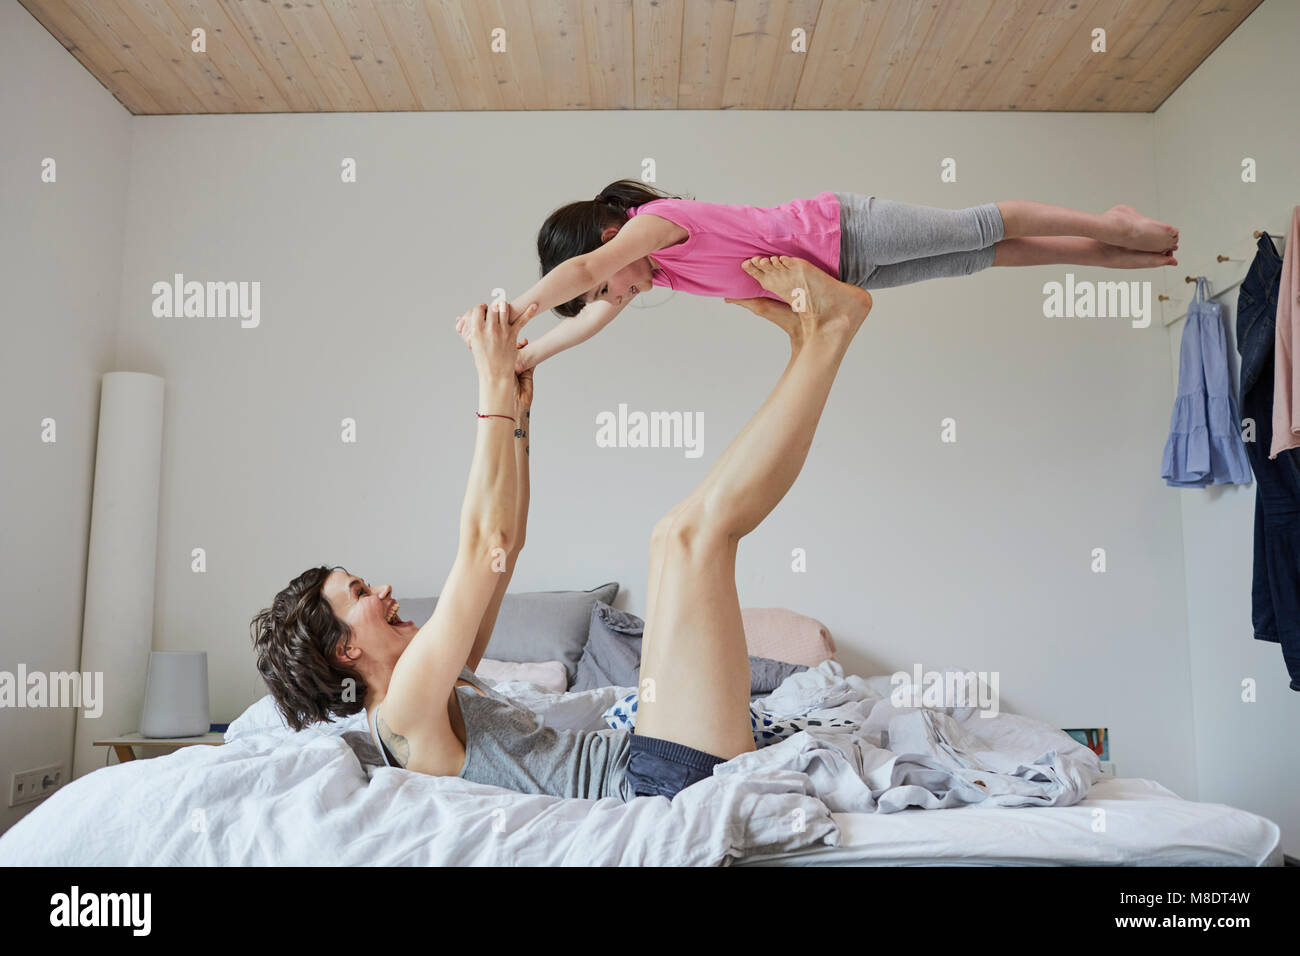 Mother and daughter playing in bedroom, mother balancing daughter on feet Stock Photo